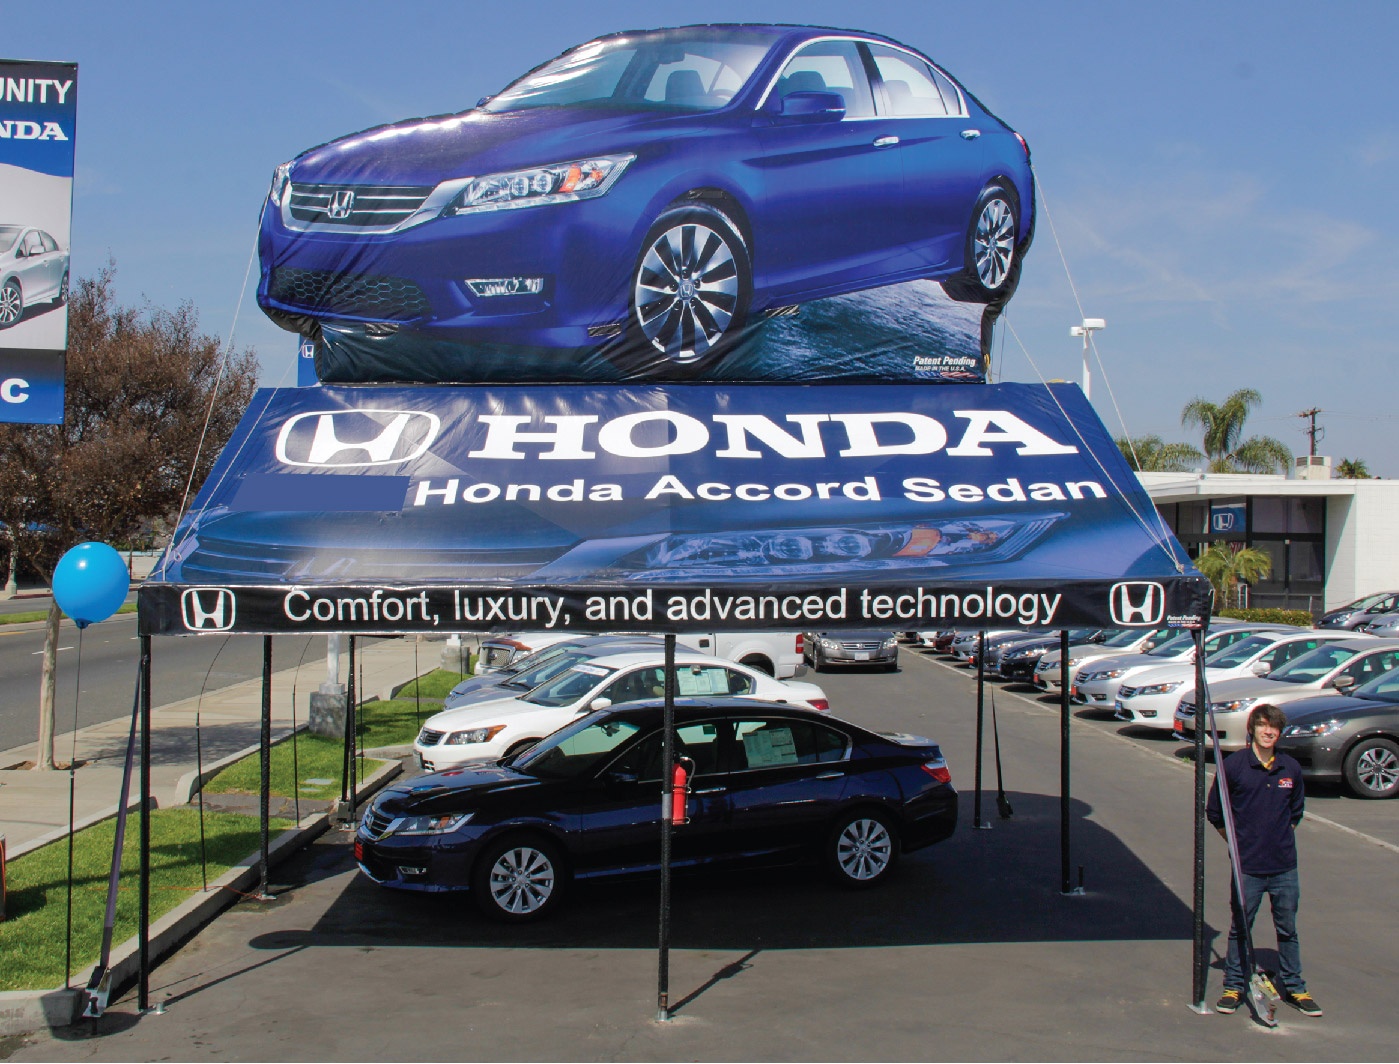 Honda Accord 20x20 Frame Tent with graphics printed on the tent with Honda slogans